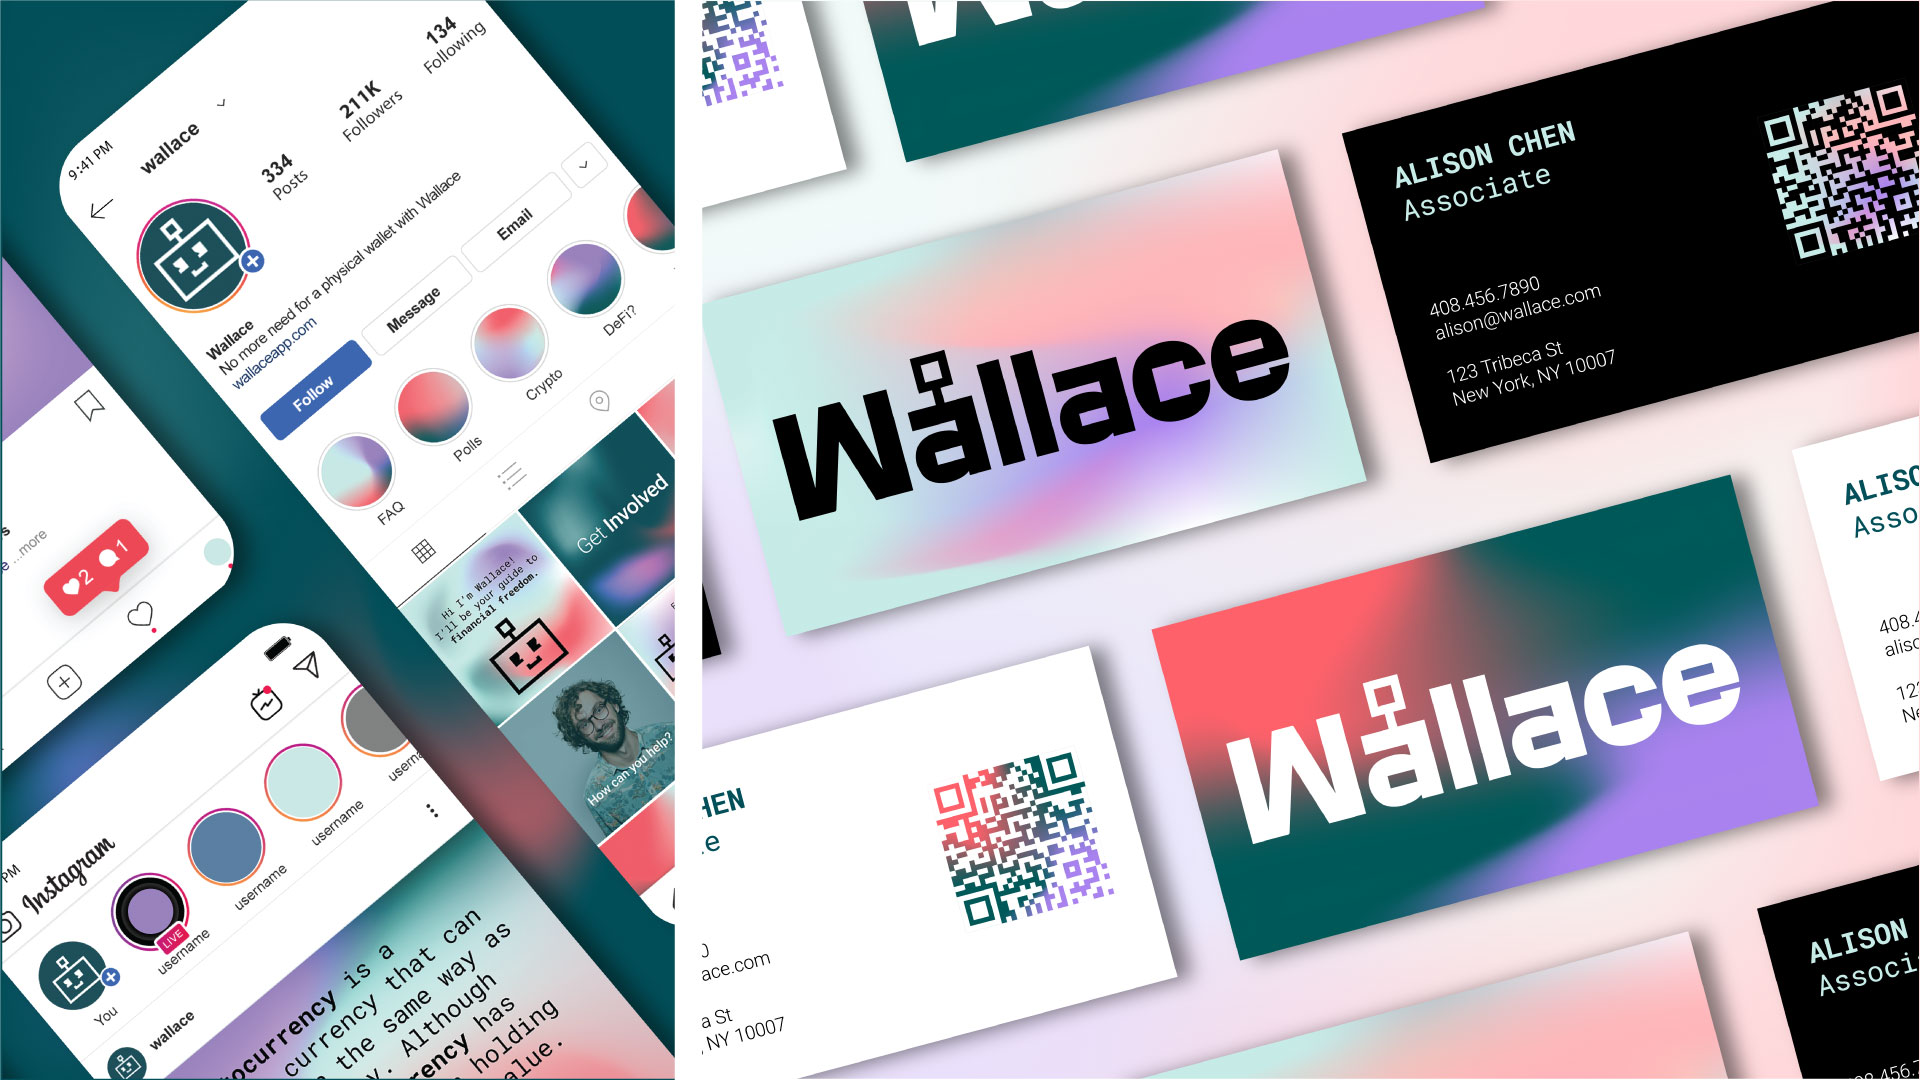 graphic design for a digital wallet app that allows people to store fiat government currency and crypto currency all in one place the design features bright greens, reds and purples used in a gradated way